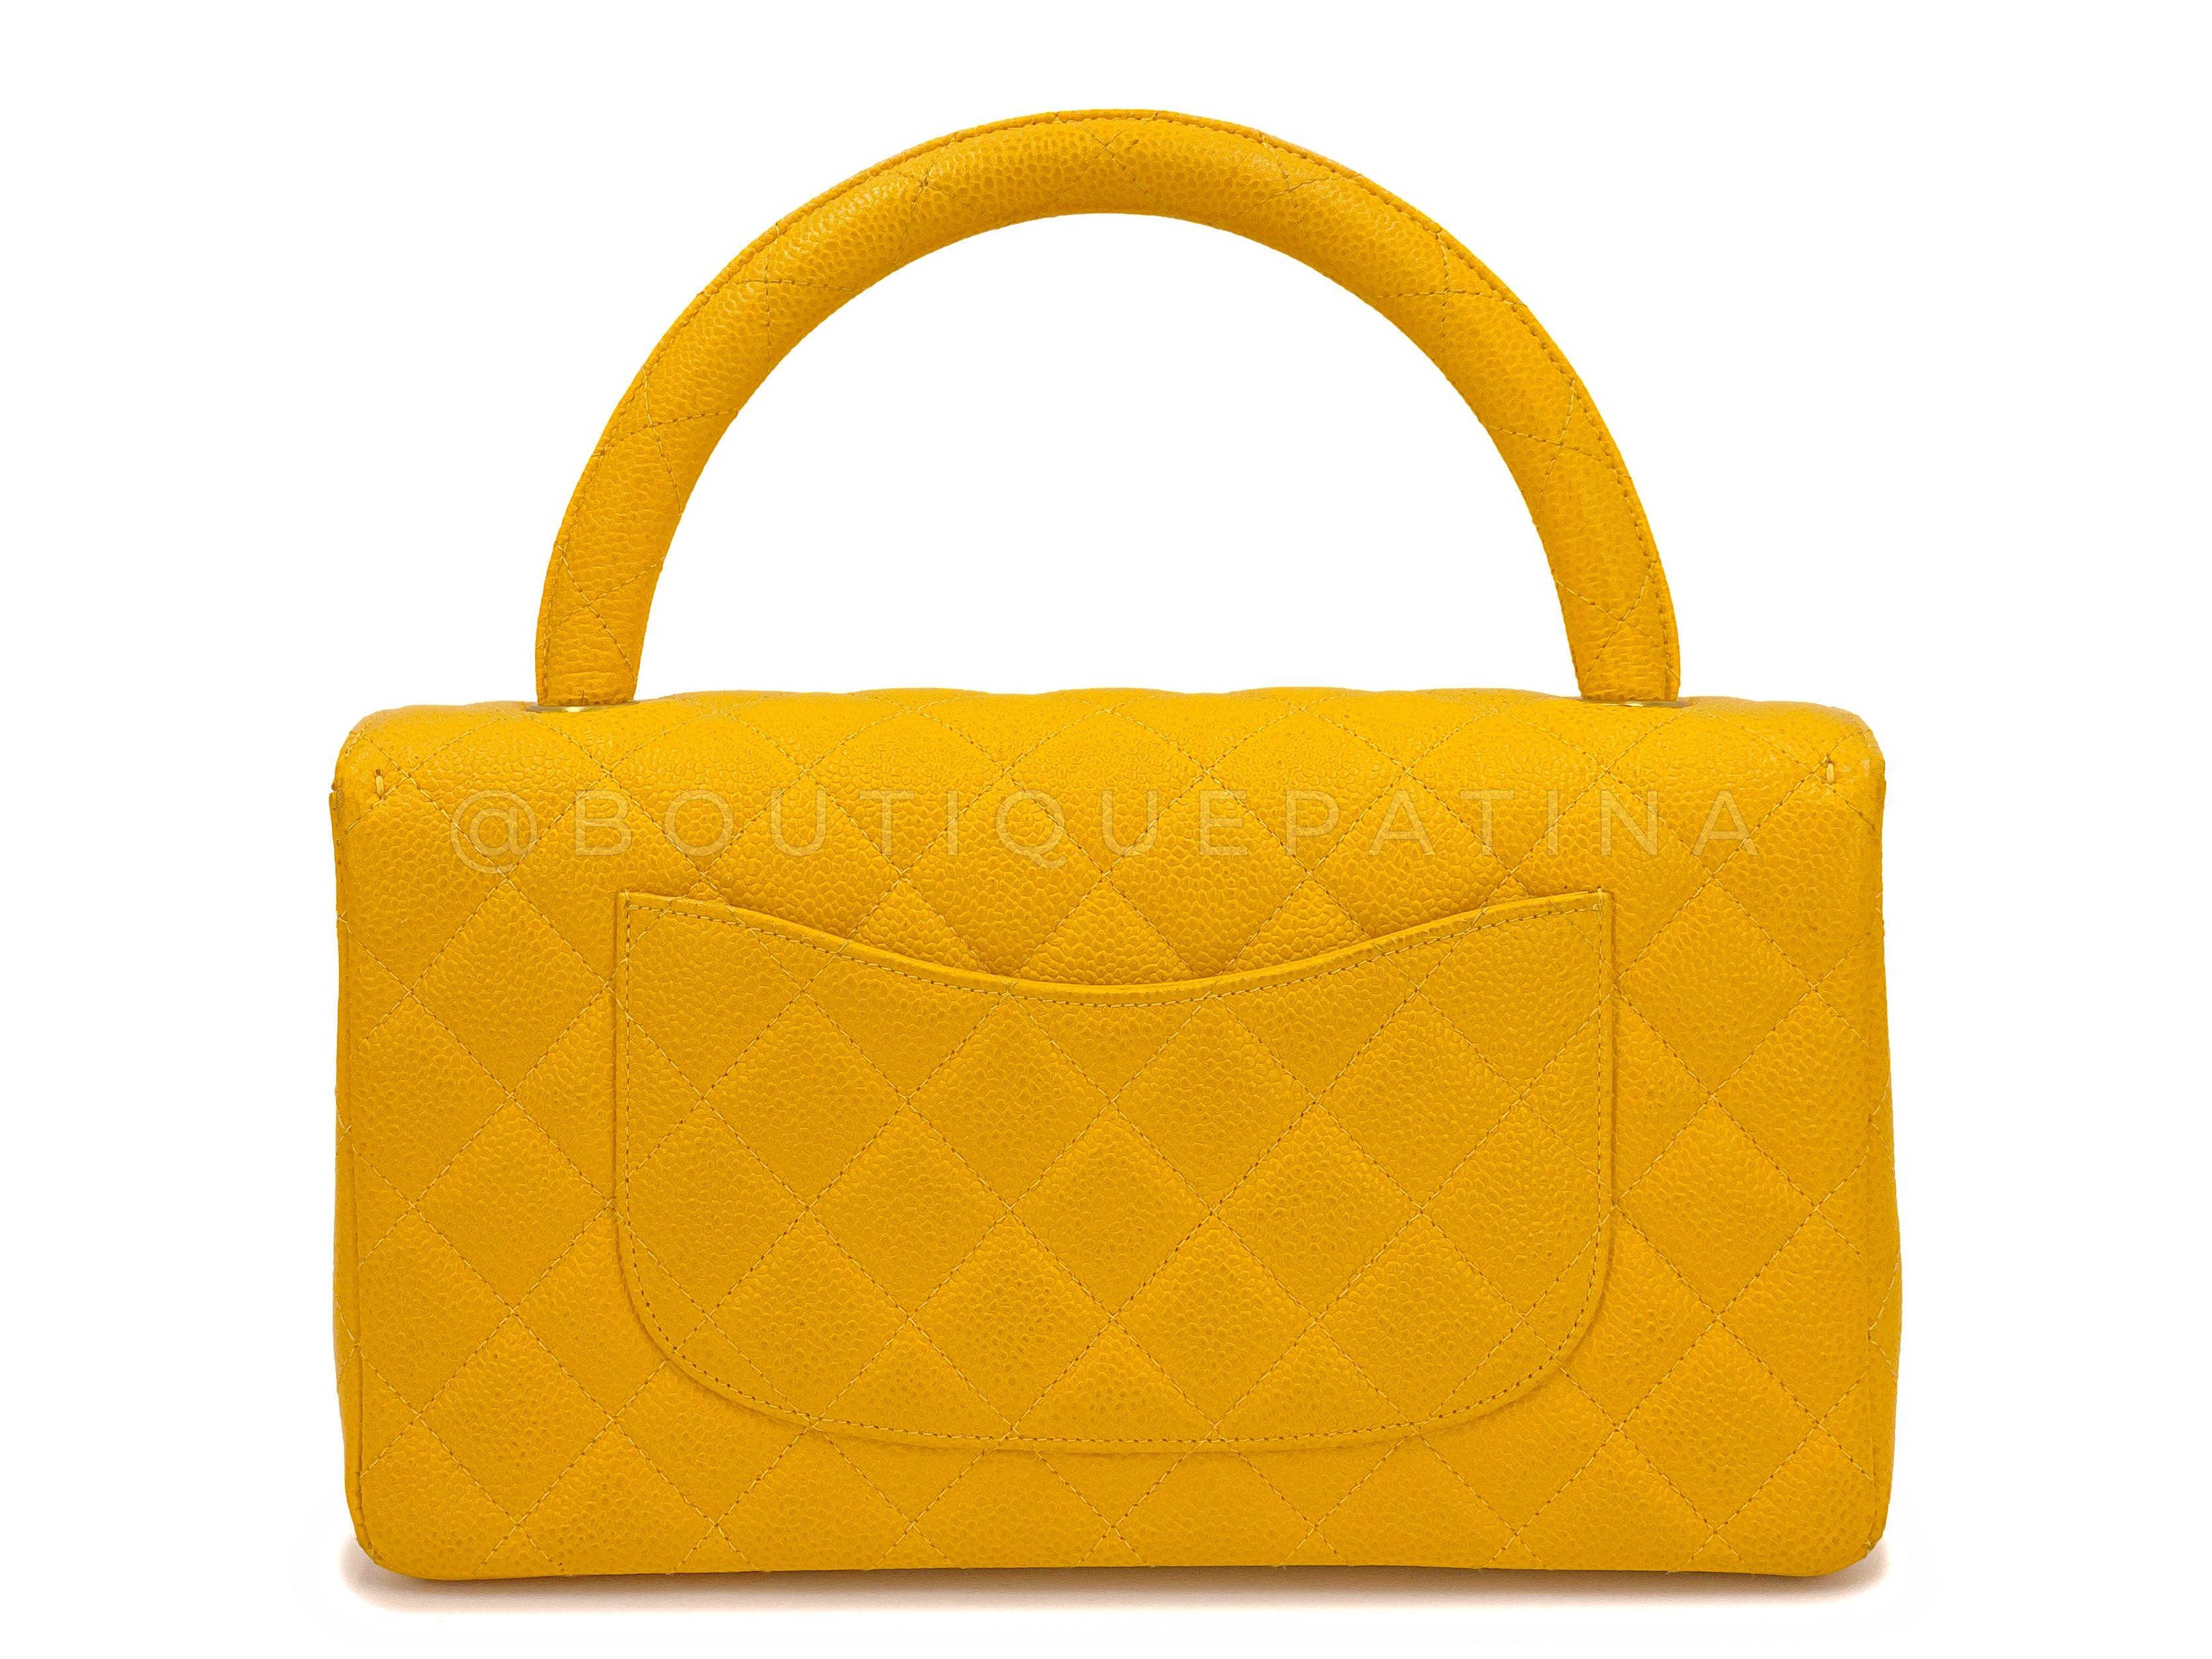 Chanel 1997 Vintage Canary Yellow Caviar Kelly Flap Parent Bag 24k GHW 66771 For Sale 1